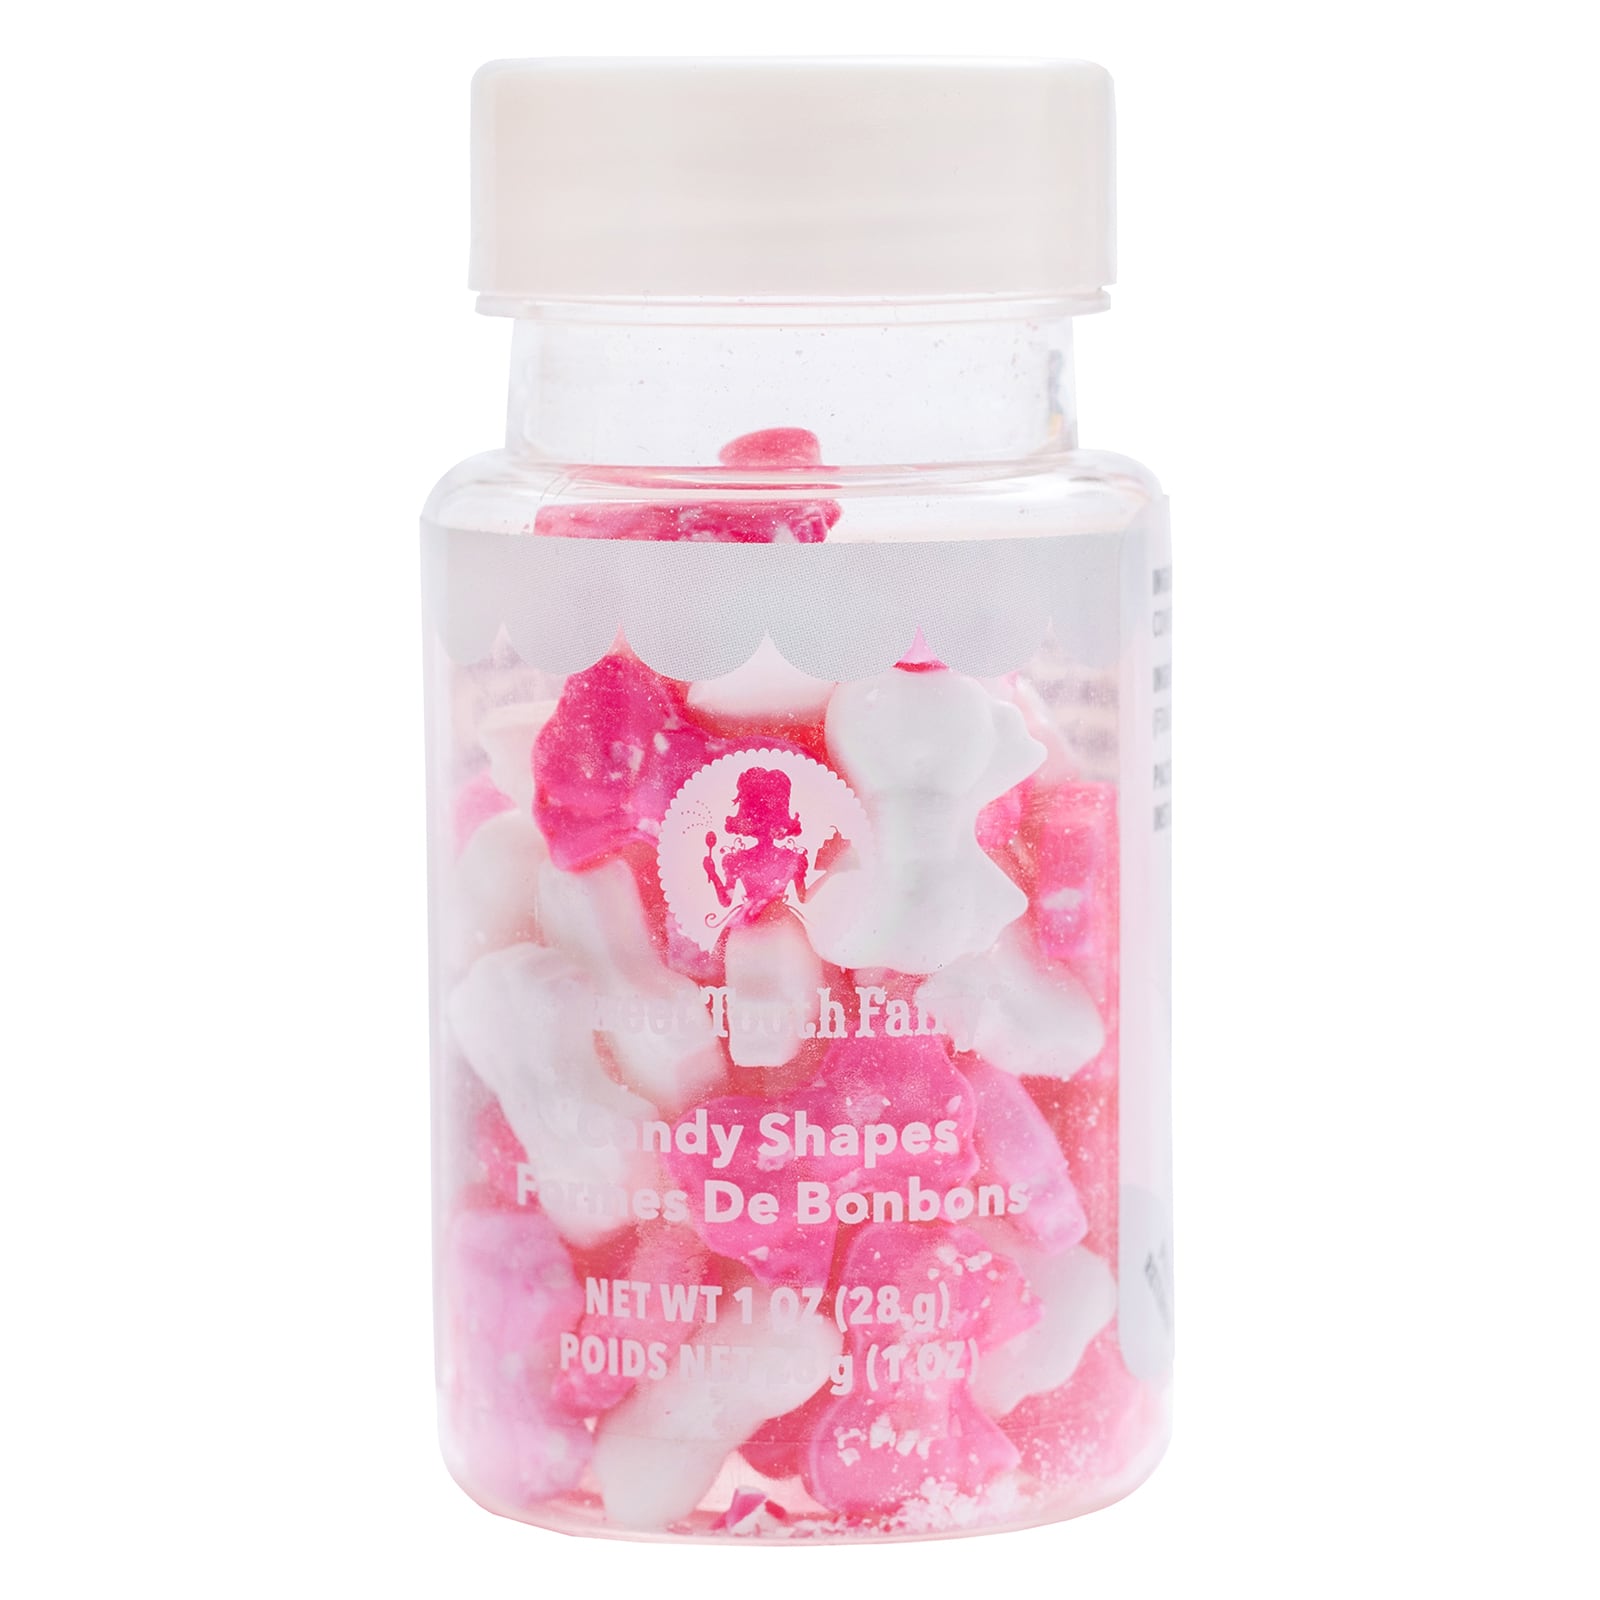 Sweet Tooth Fairy® Flower Medley Candy Shapes